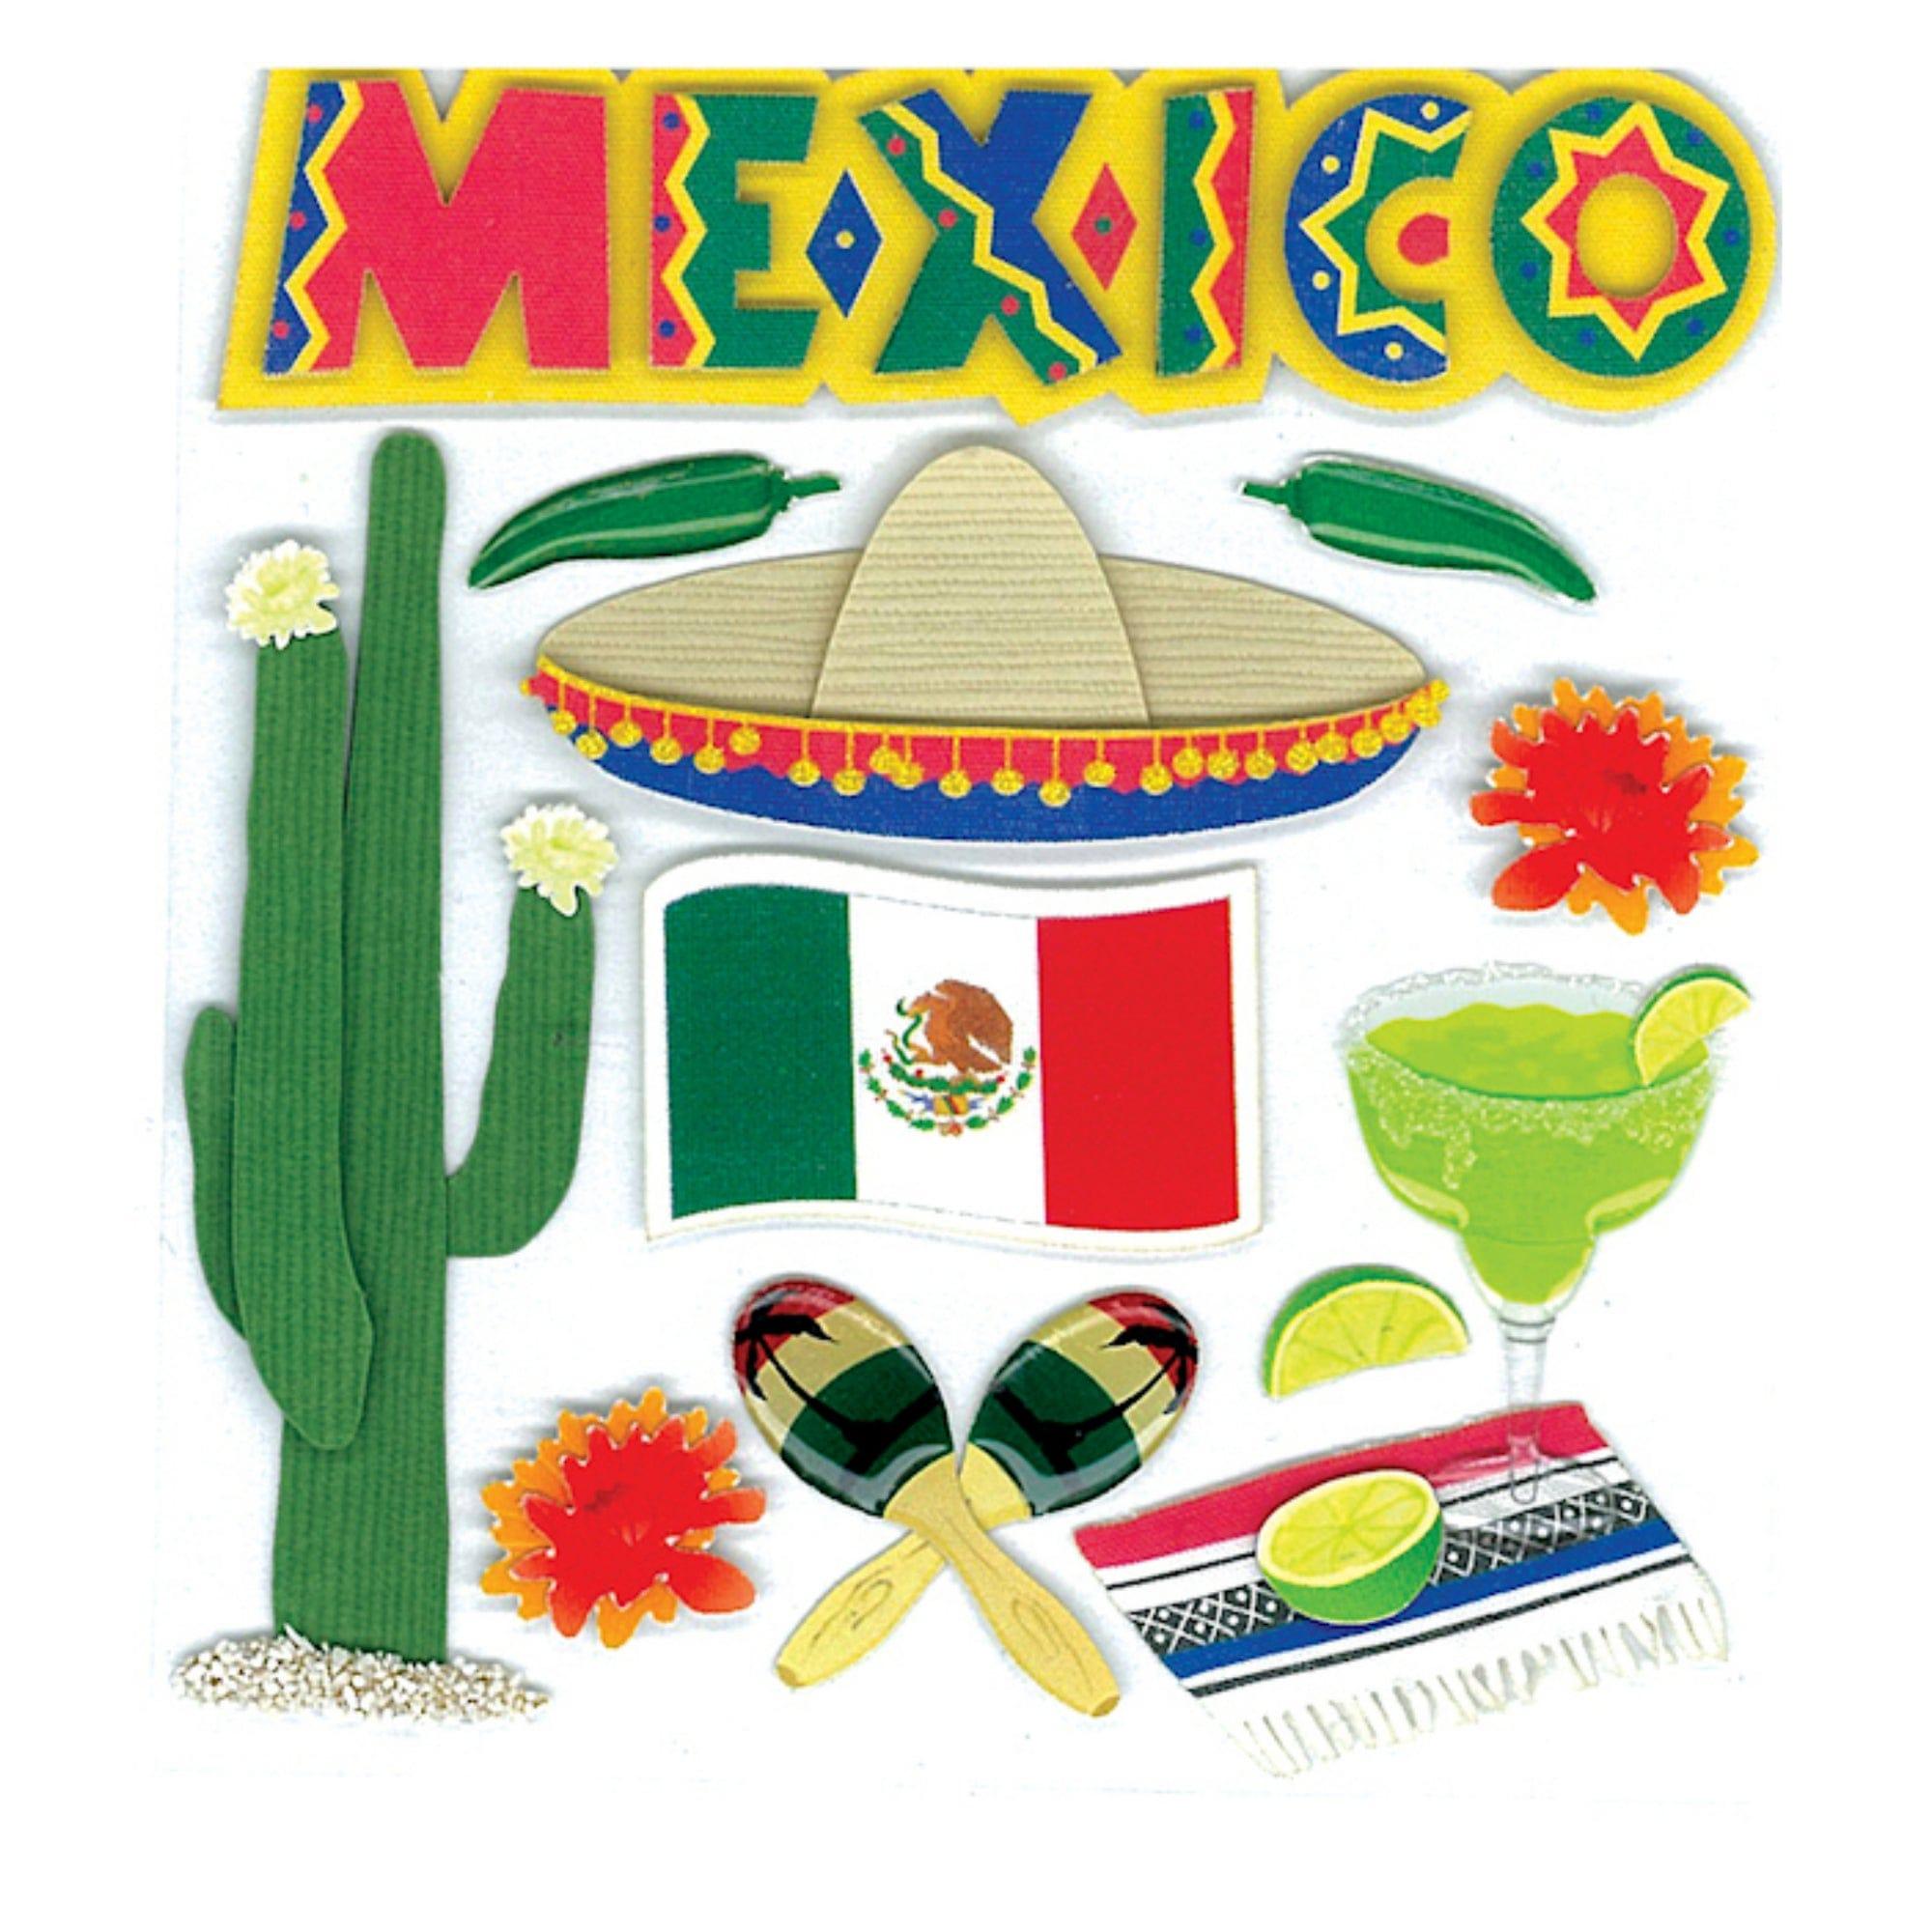 Mexico 4 x 6 Dimensional Scrapbook Embellishment by Jolee's Boutique - Scrapbook Supply Companies